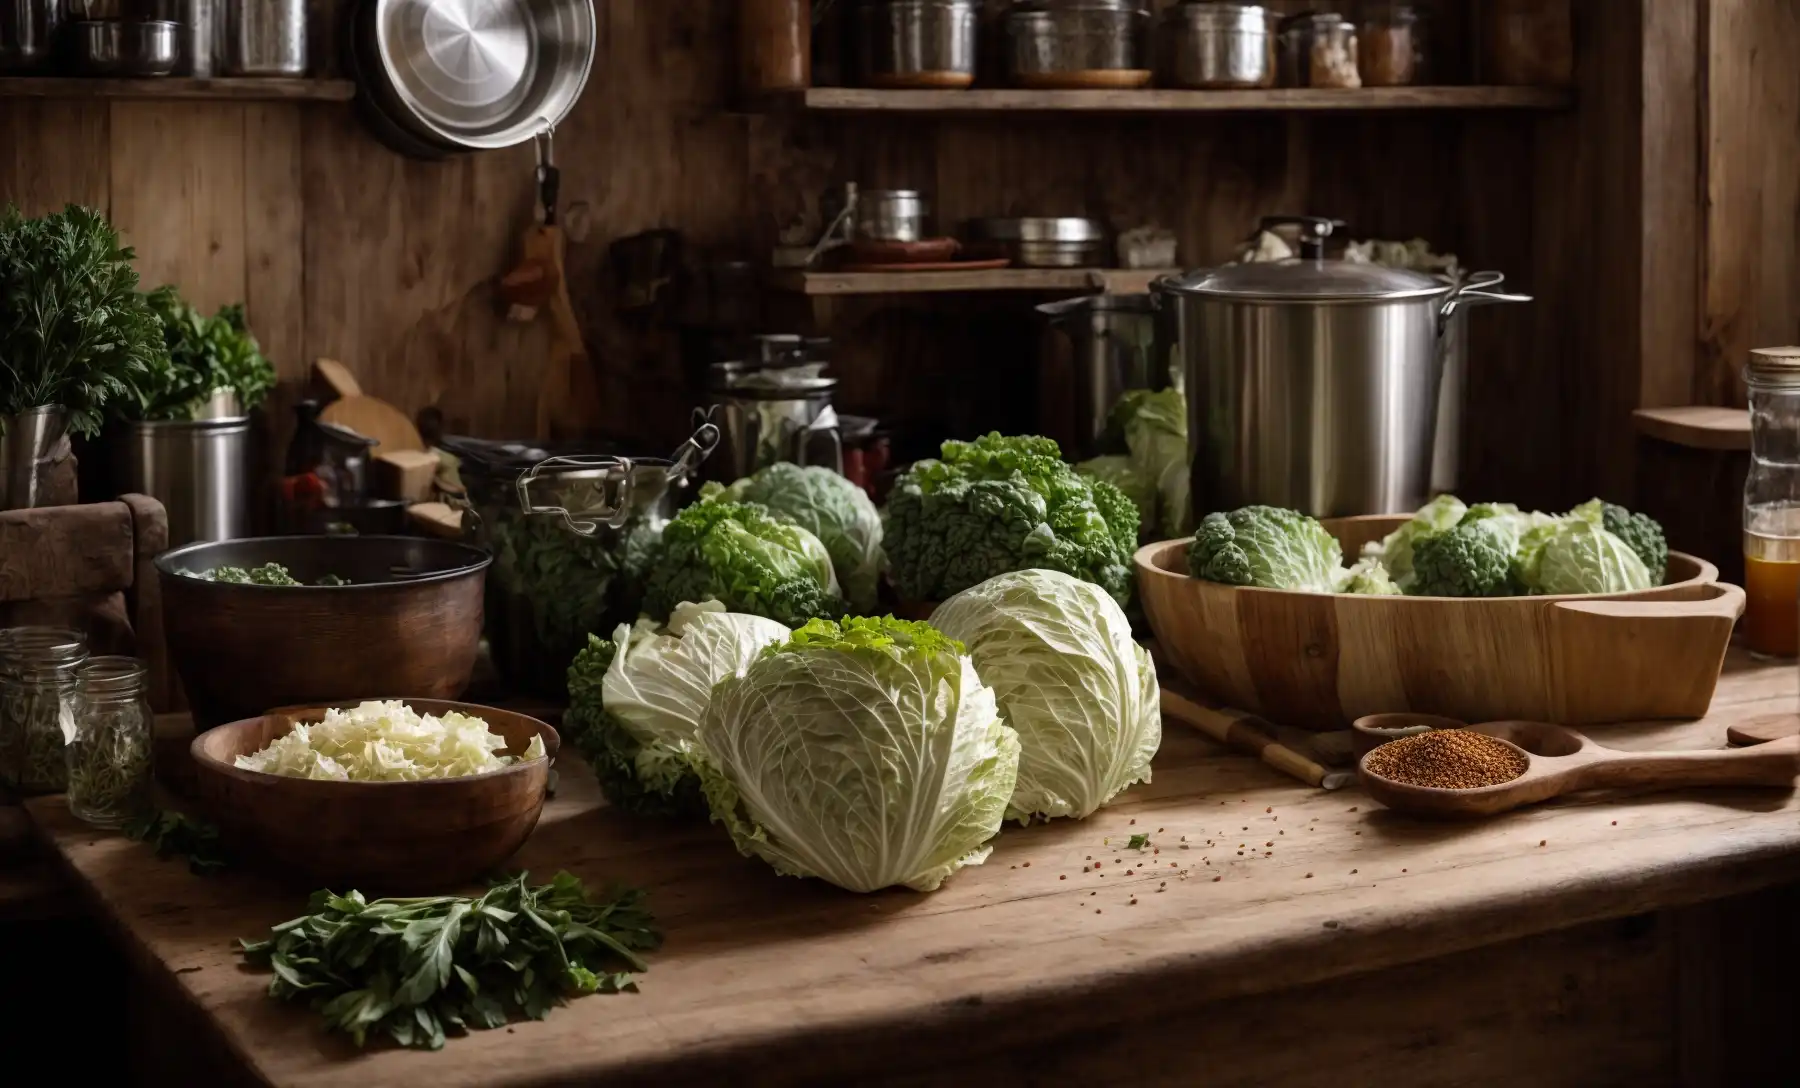 Can Cabbage Without a Pressure Cooker